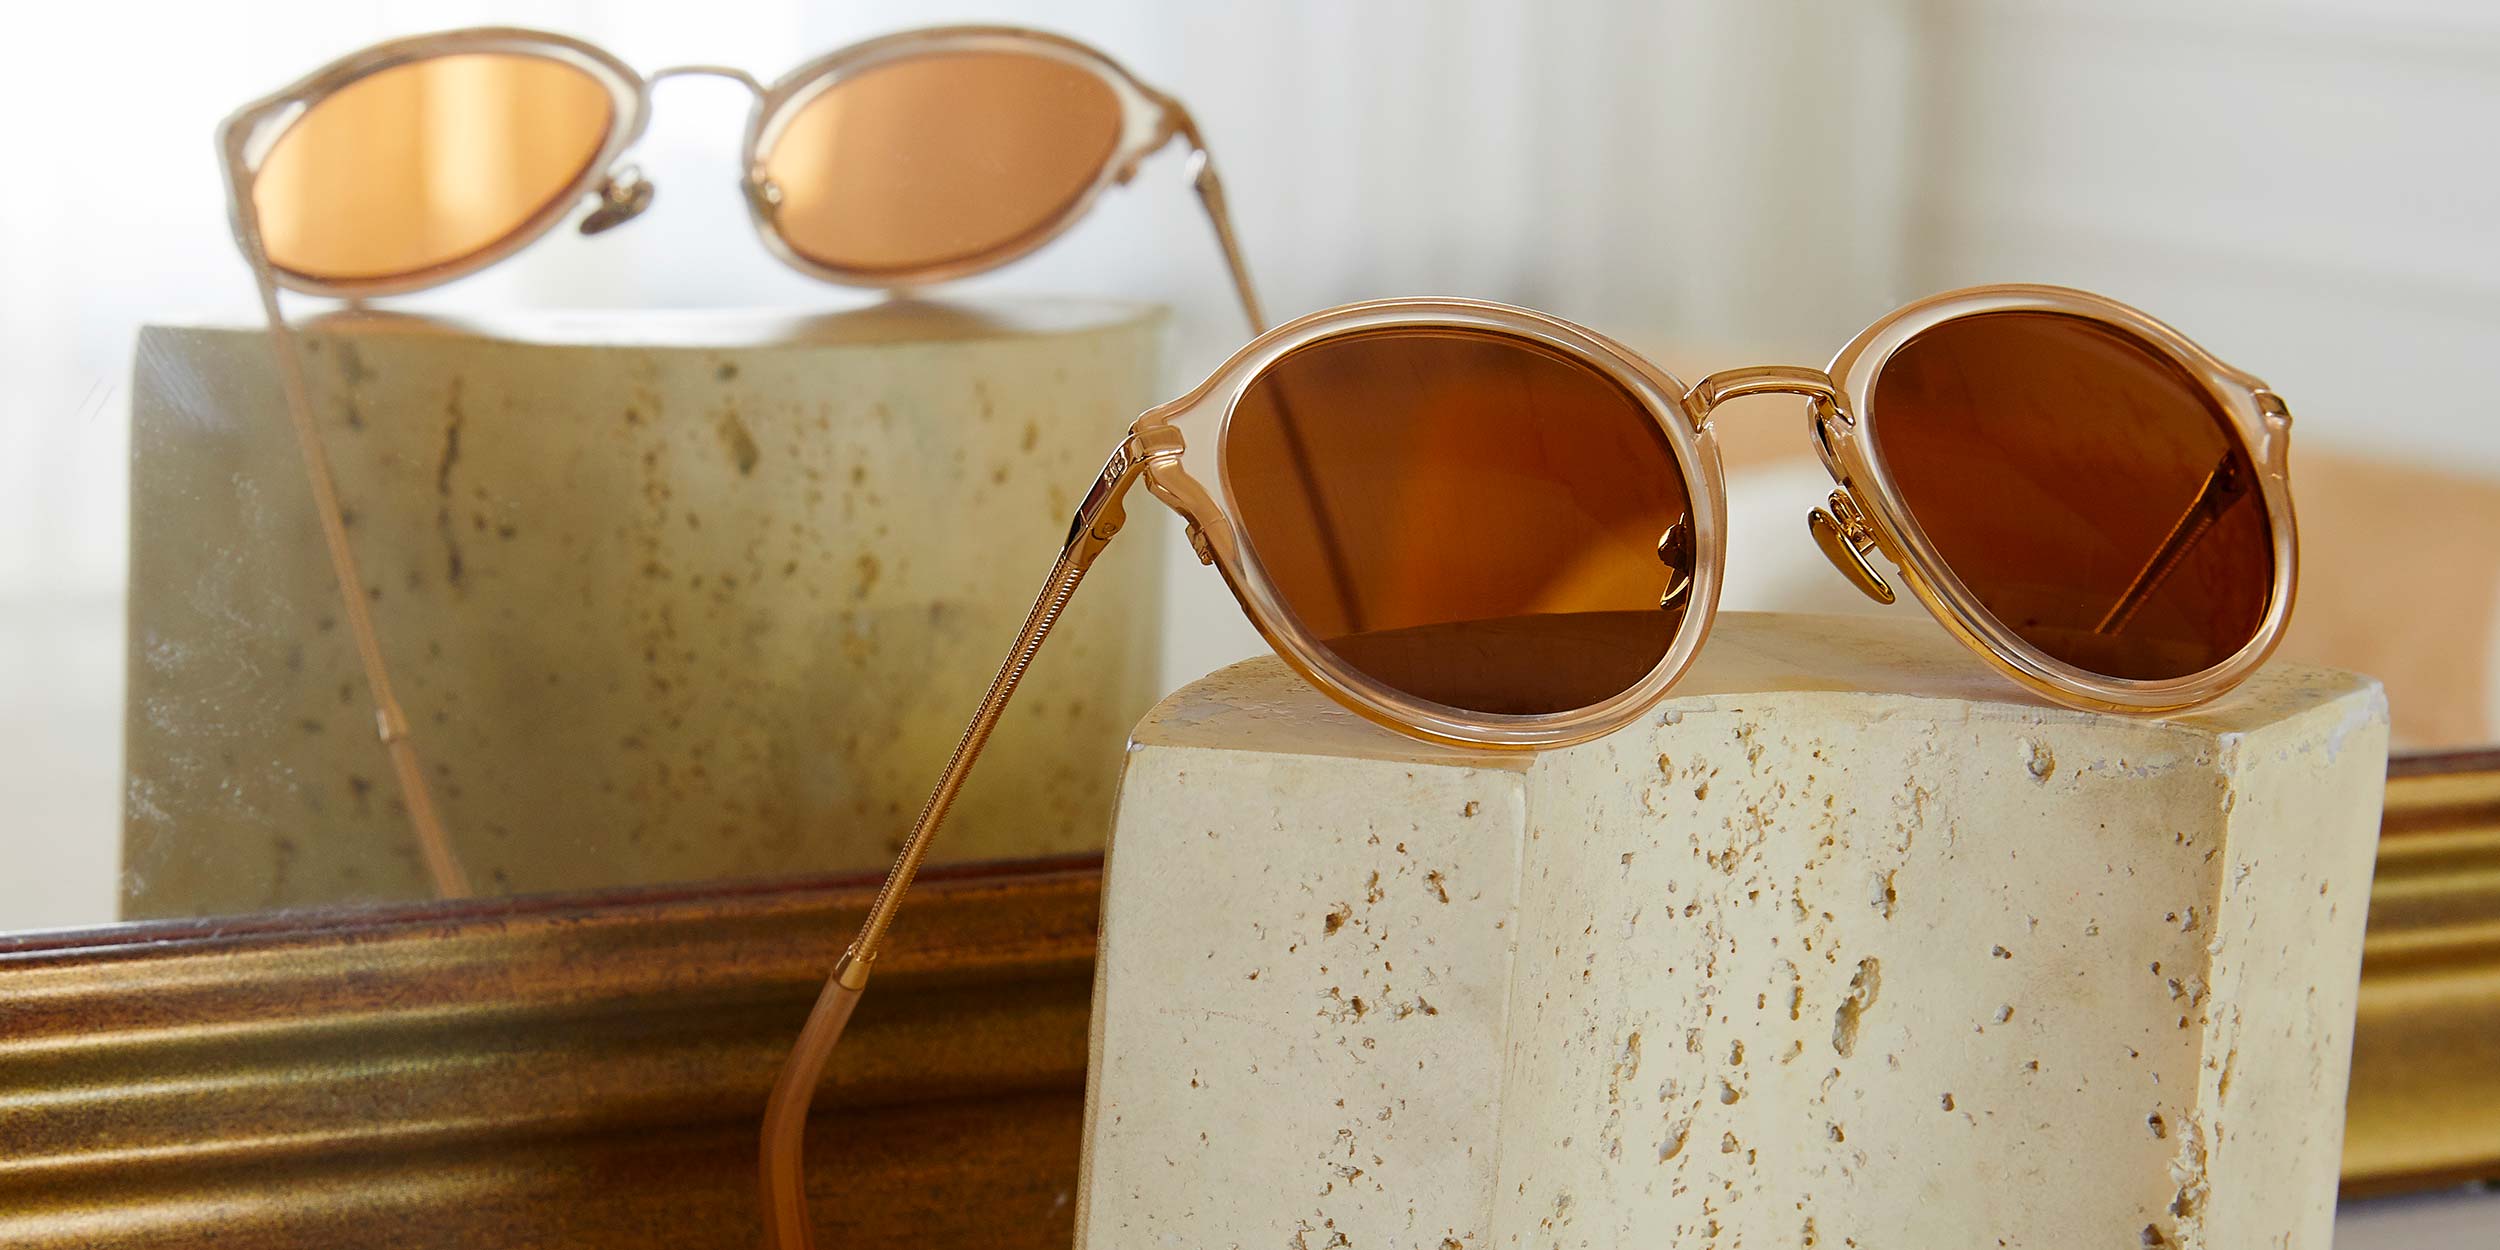 Photo Details of Morgan Sun Apricot & Gold Sun Glasses in a room